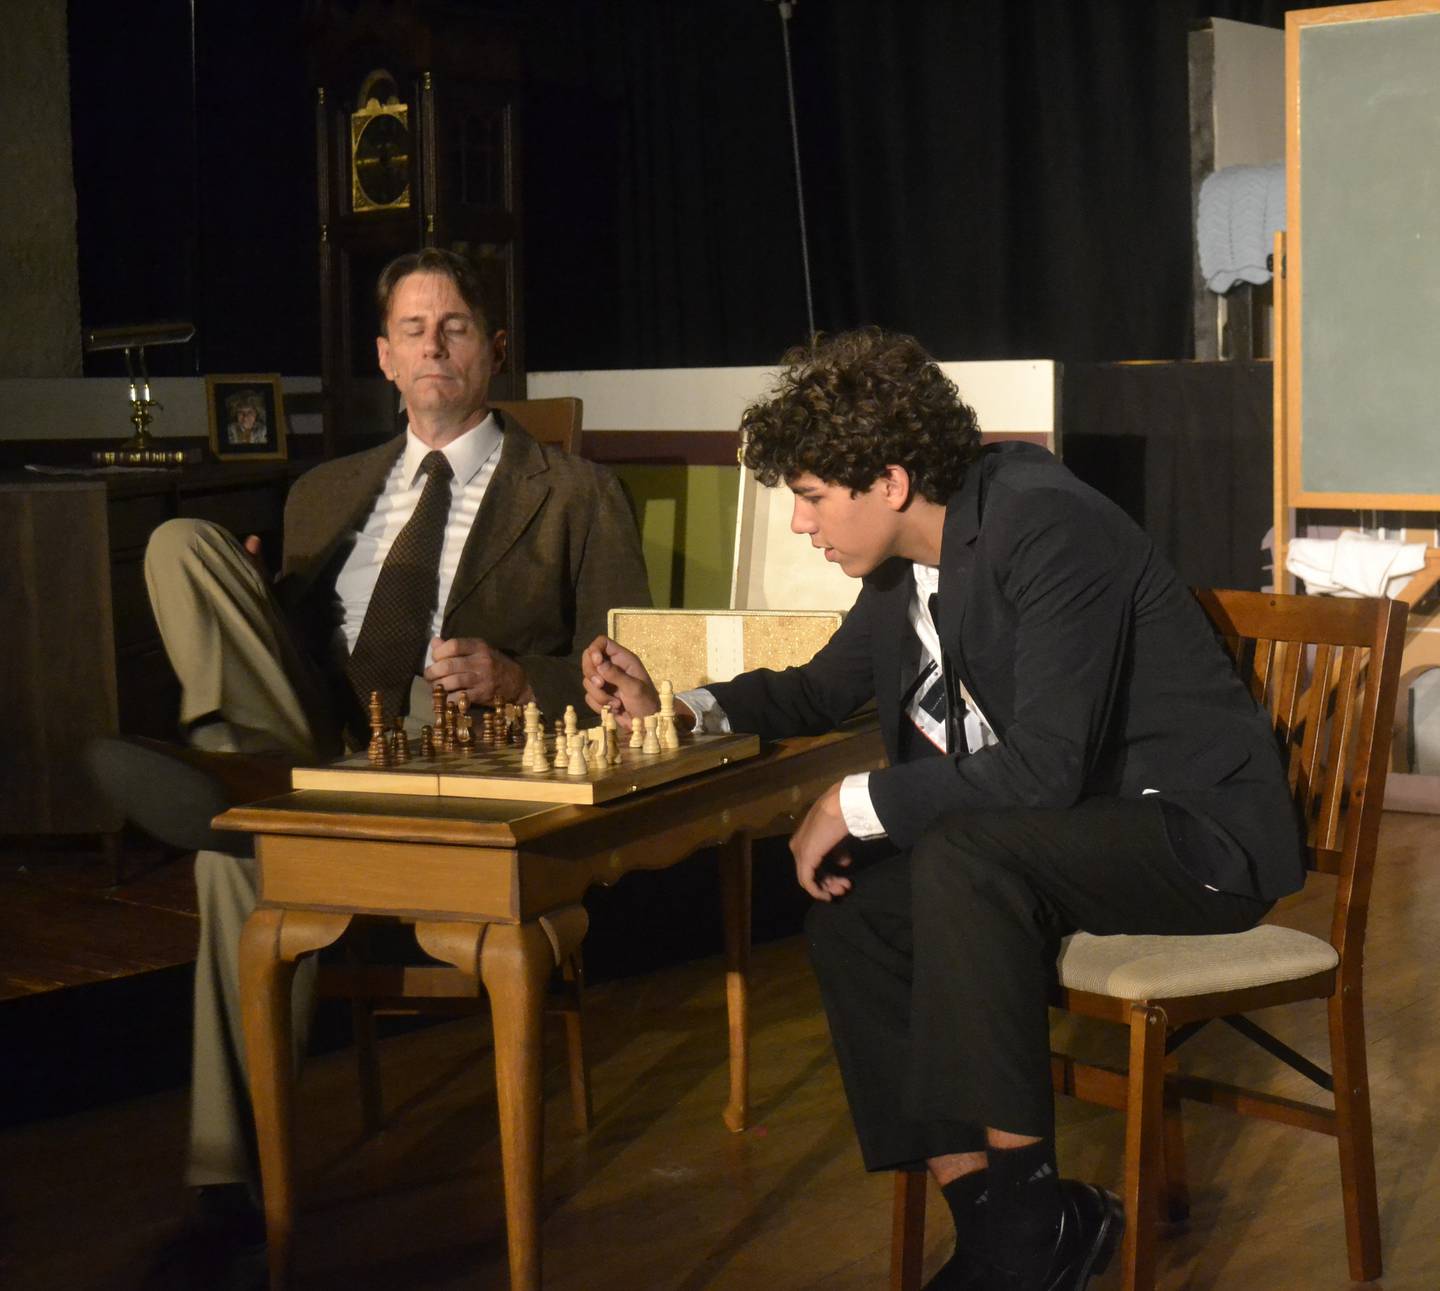 John Pietrzyk (from left) portrays Alan Hoffman, and Alexander Garcia is Jim Quinn in "Prodigal Son," presented by Elgin Theatre Company.